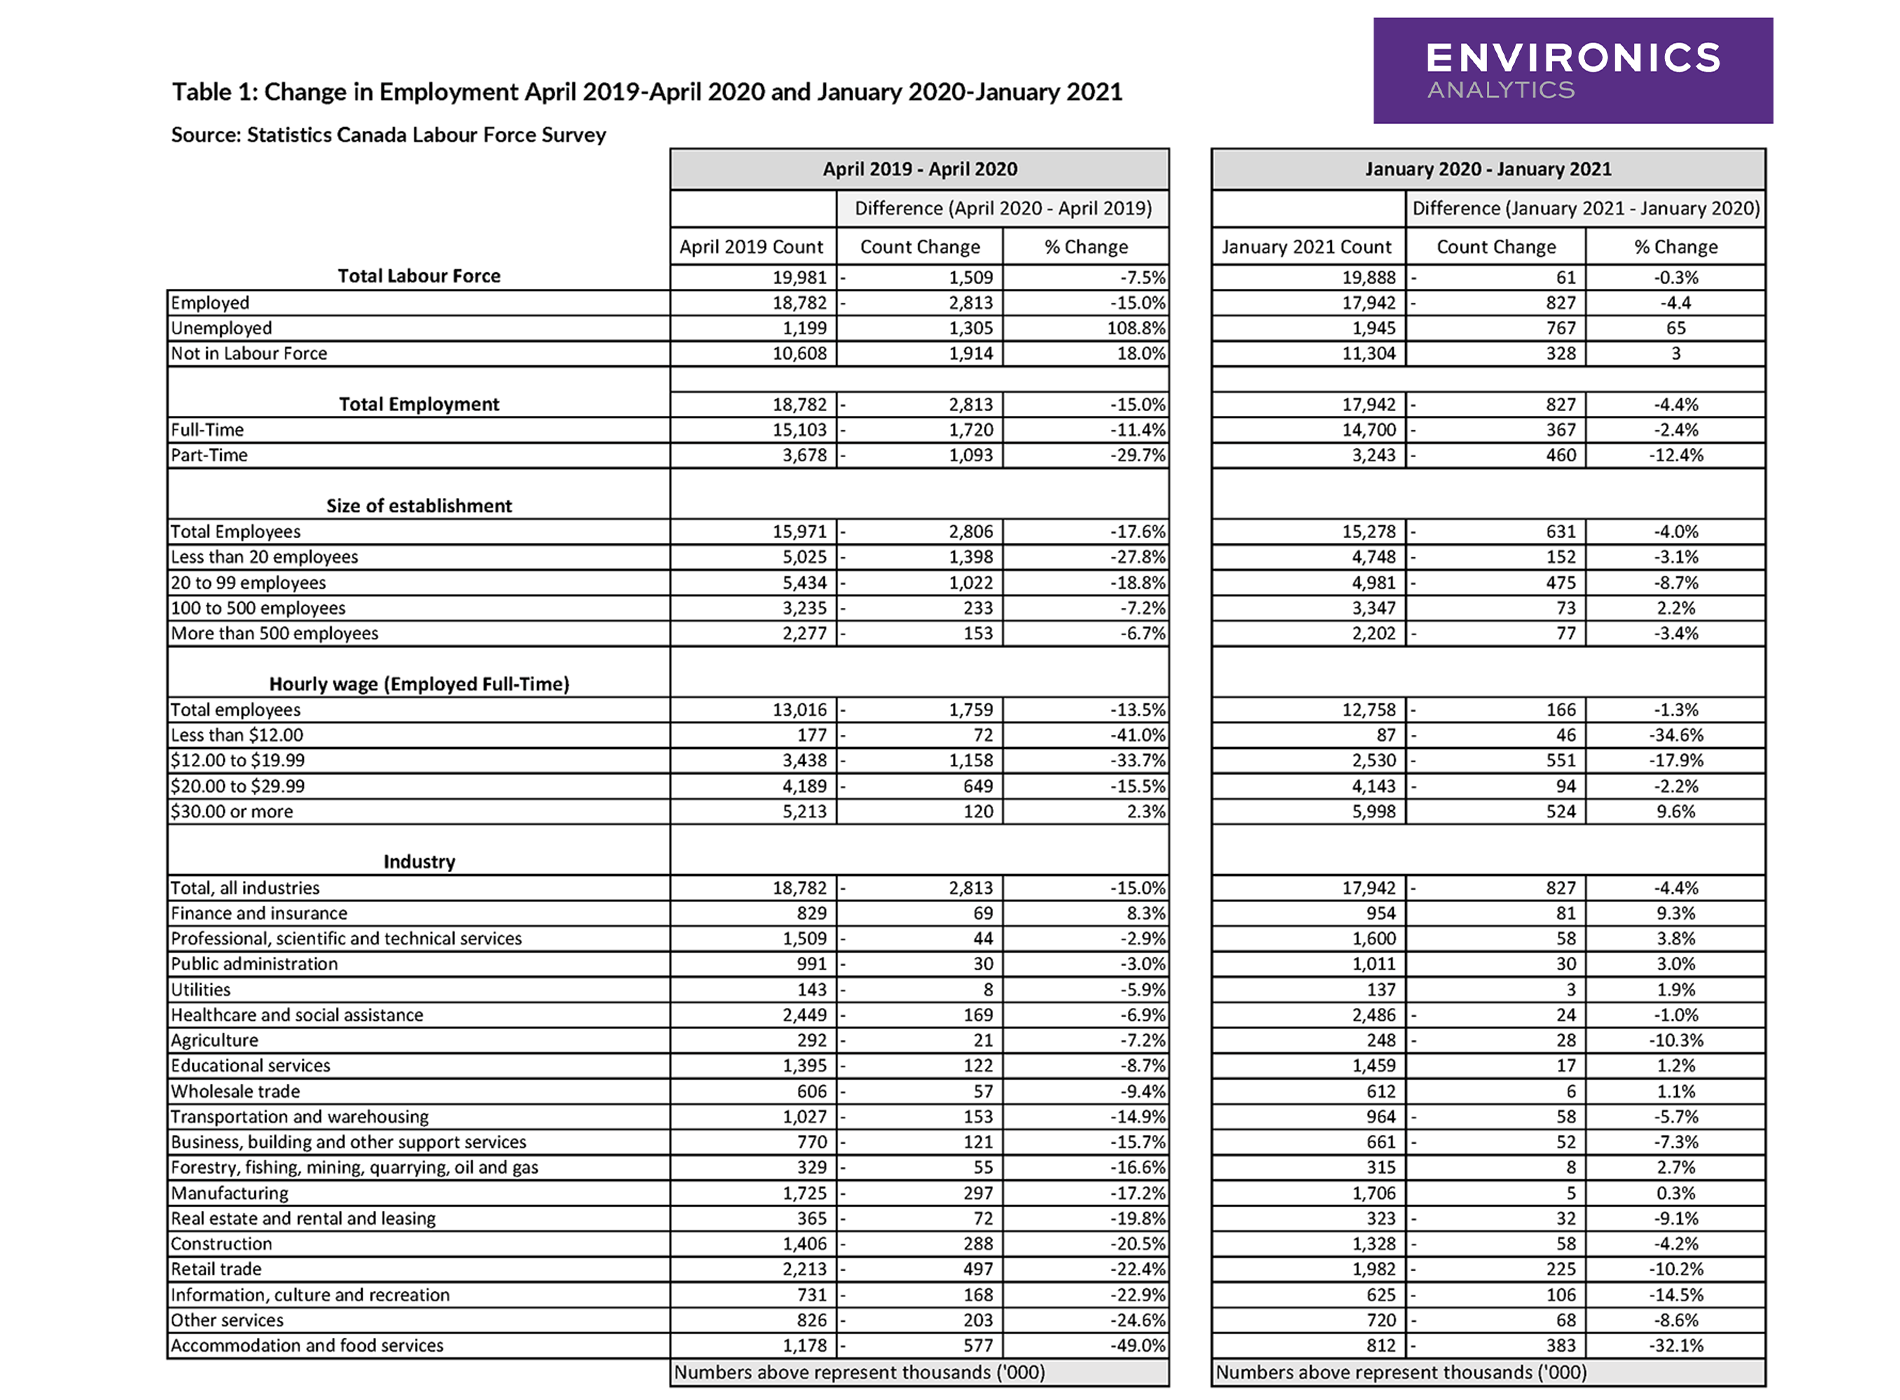 Table 1 Change in Employment April 2019 to 2020 and January 2020 to 2021